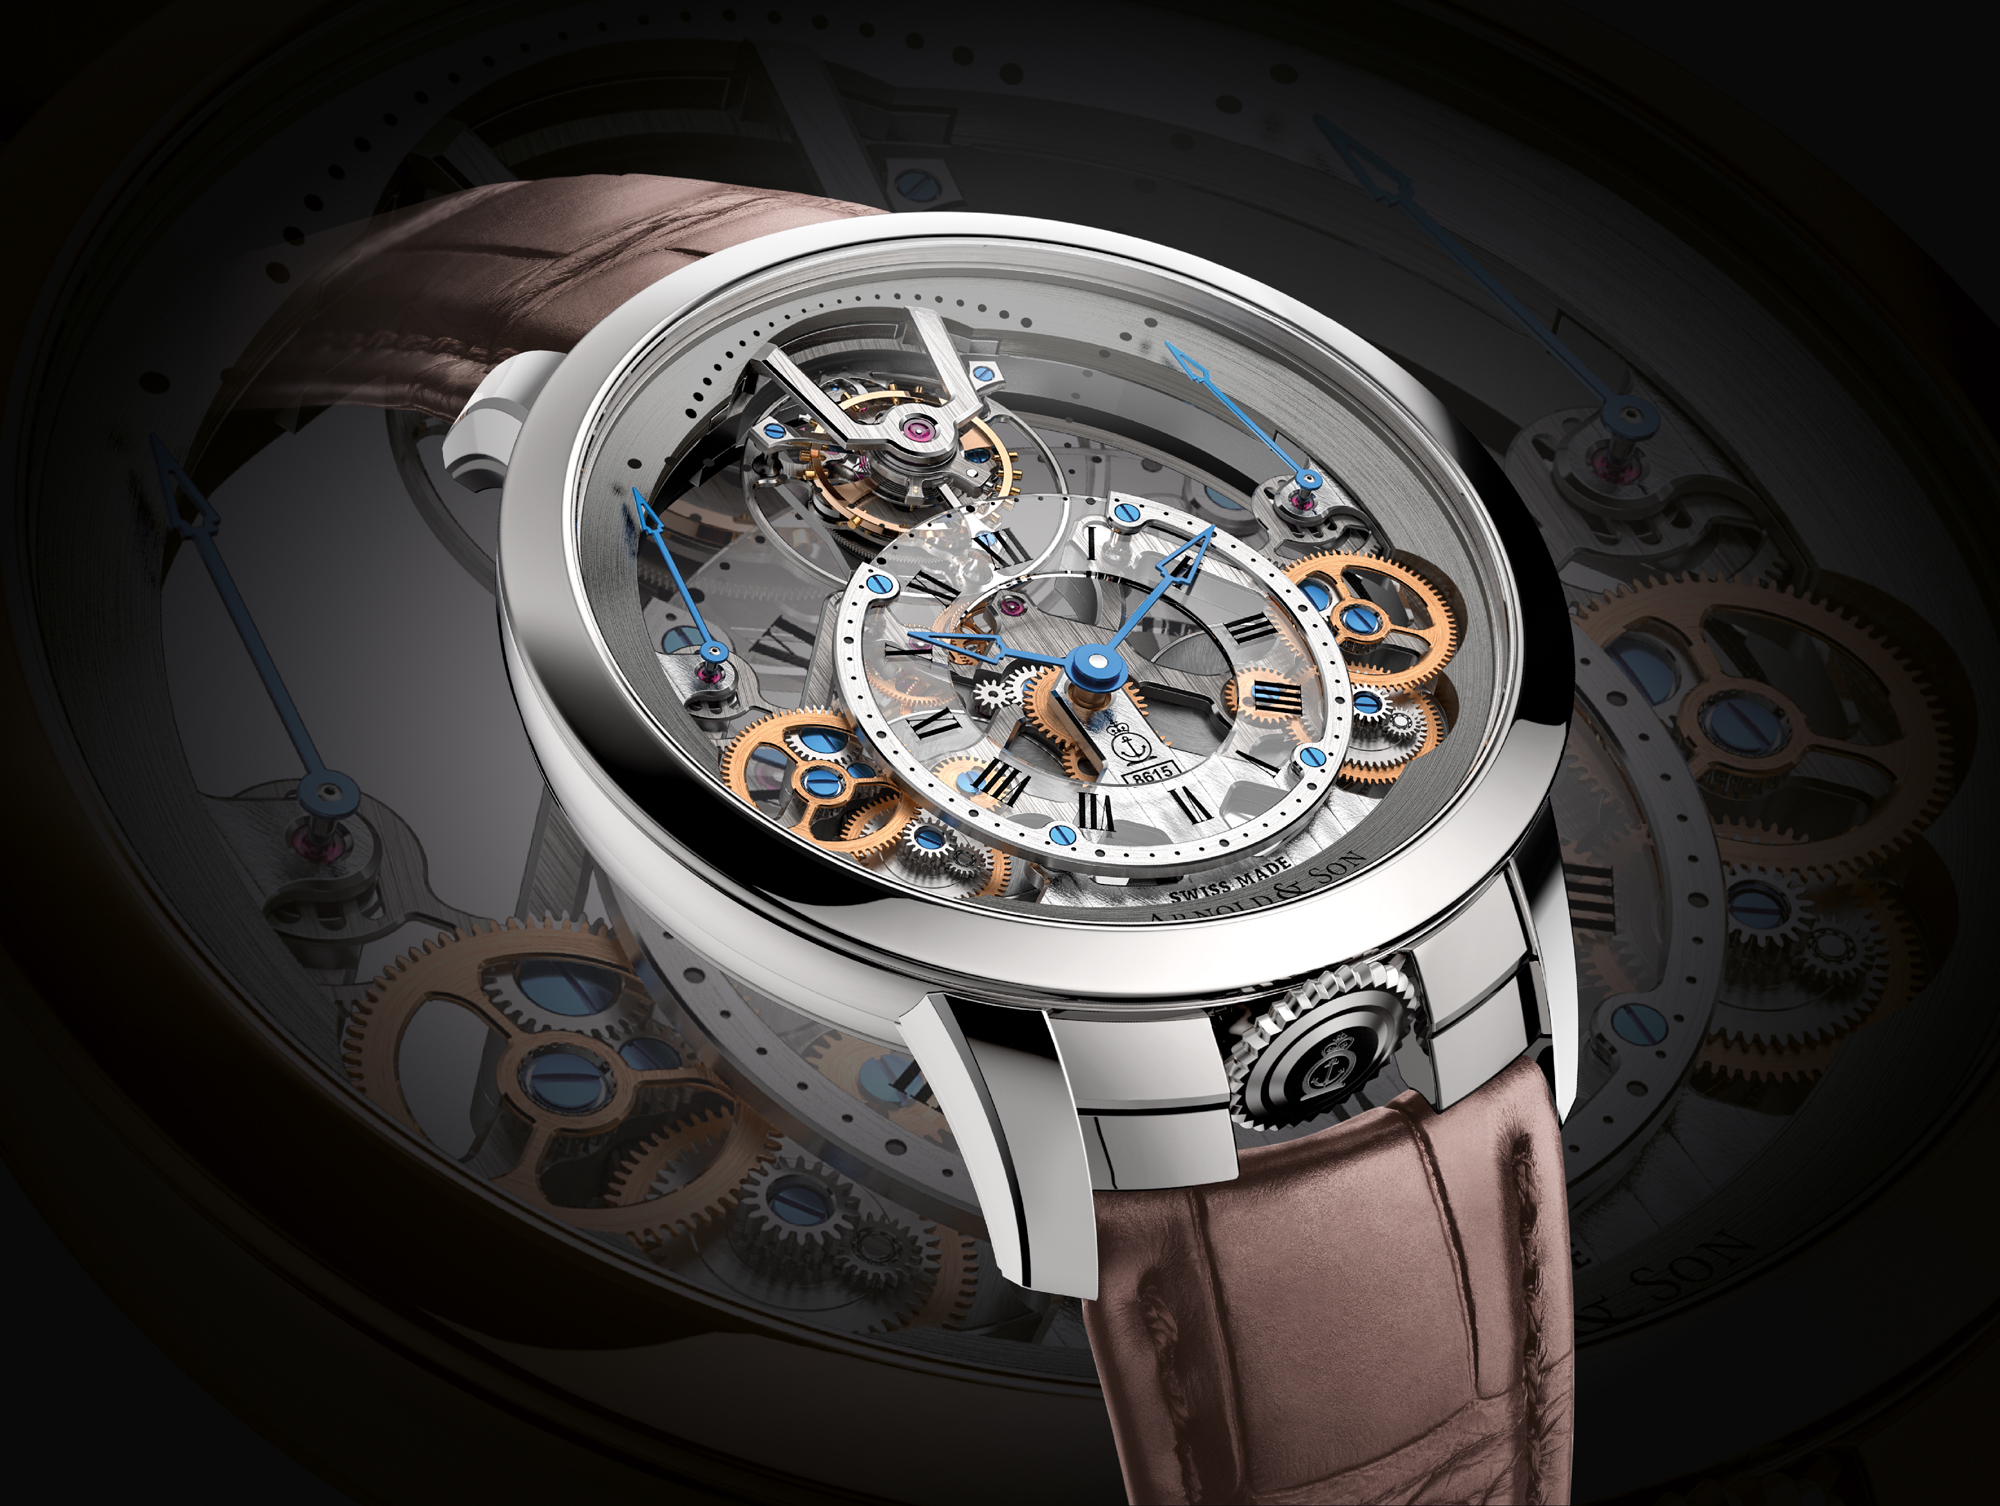 The iconic Time Pyramid makes a comeback with a skeletonised flying tourbillon movement seemingly afloat between two sapphire crystals. Equipped with the new calibre A&S8615, the watch pays tribute to the John Arnold's regulators with their distinctive hours, minutes, and seconds on different axes. Built on three levels, the movement offers a lively, three-dimensional face to the timepiece. The 44.6mm watch is available in two variations -  18K red gold and stainless steel – limited to 28 pieces each and priced at CHF 46,800 (approx.) and CHF 37,150 (approx.) respectively. 